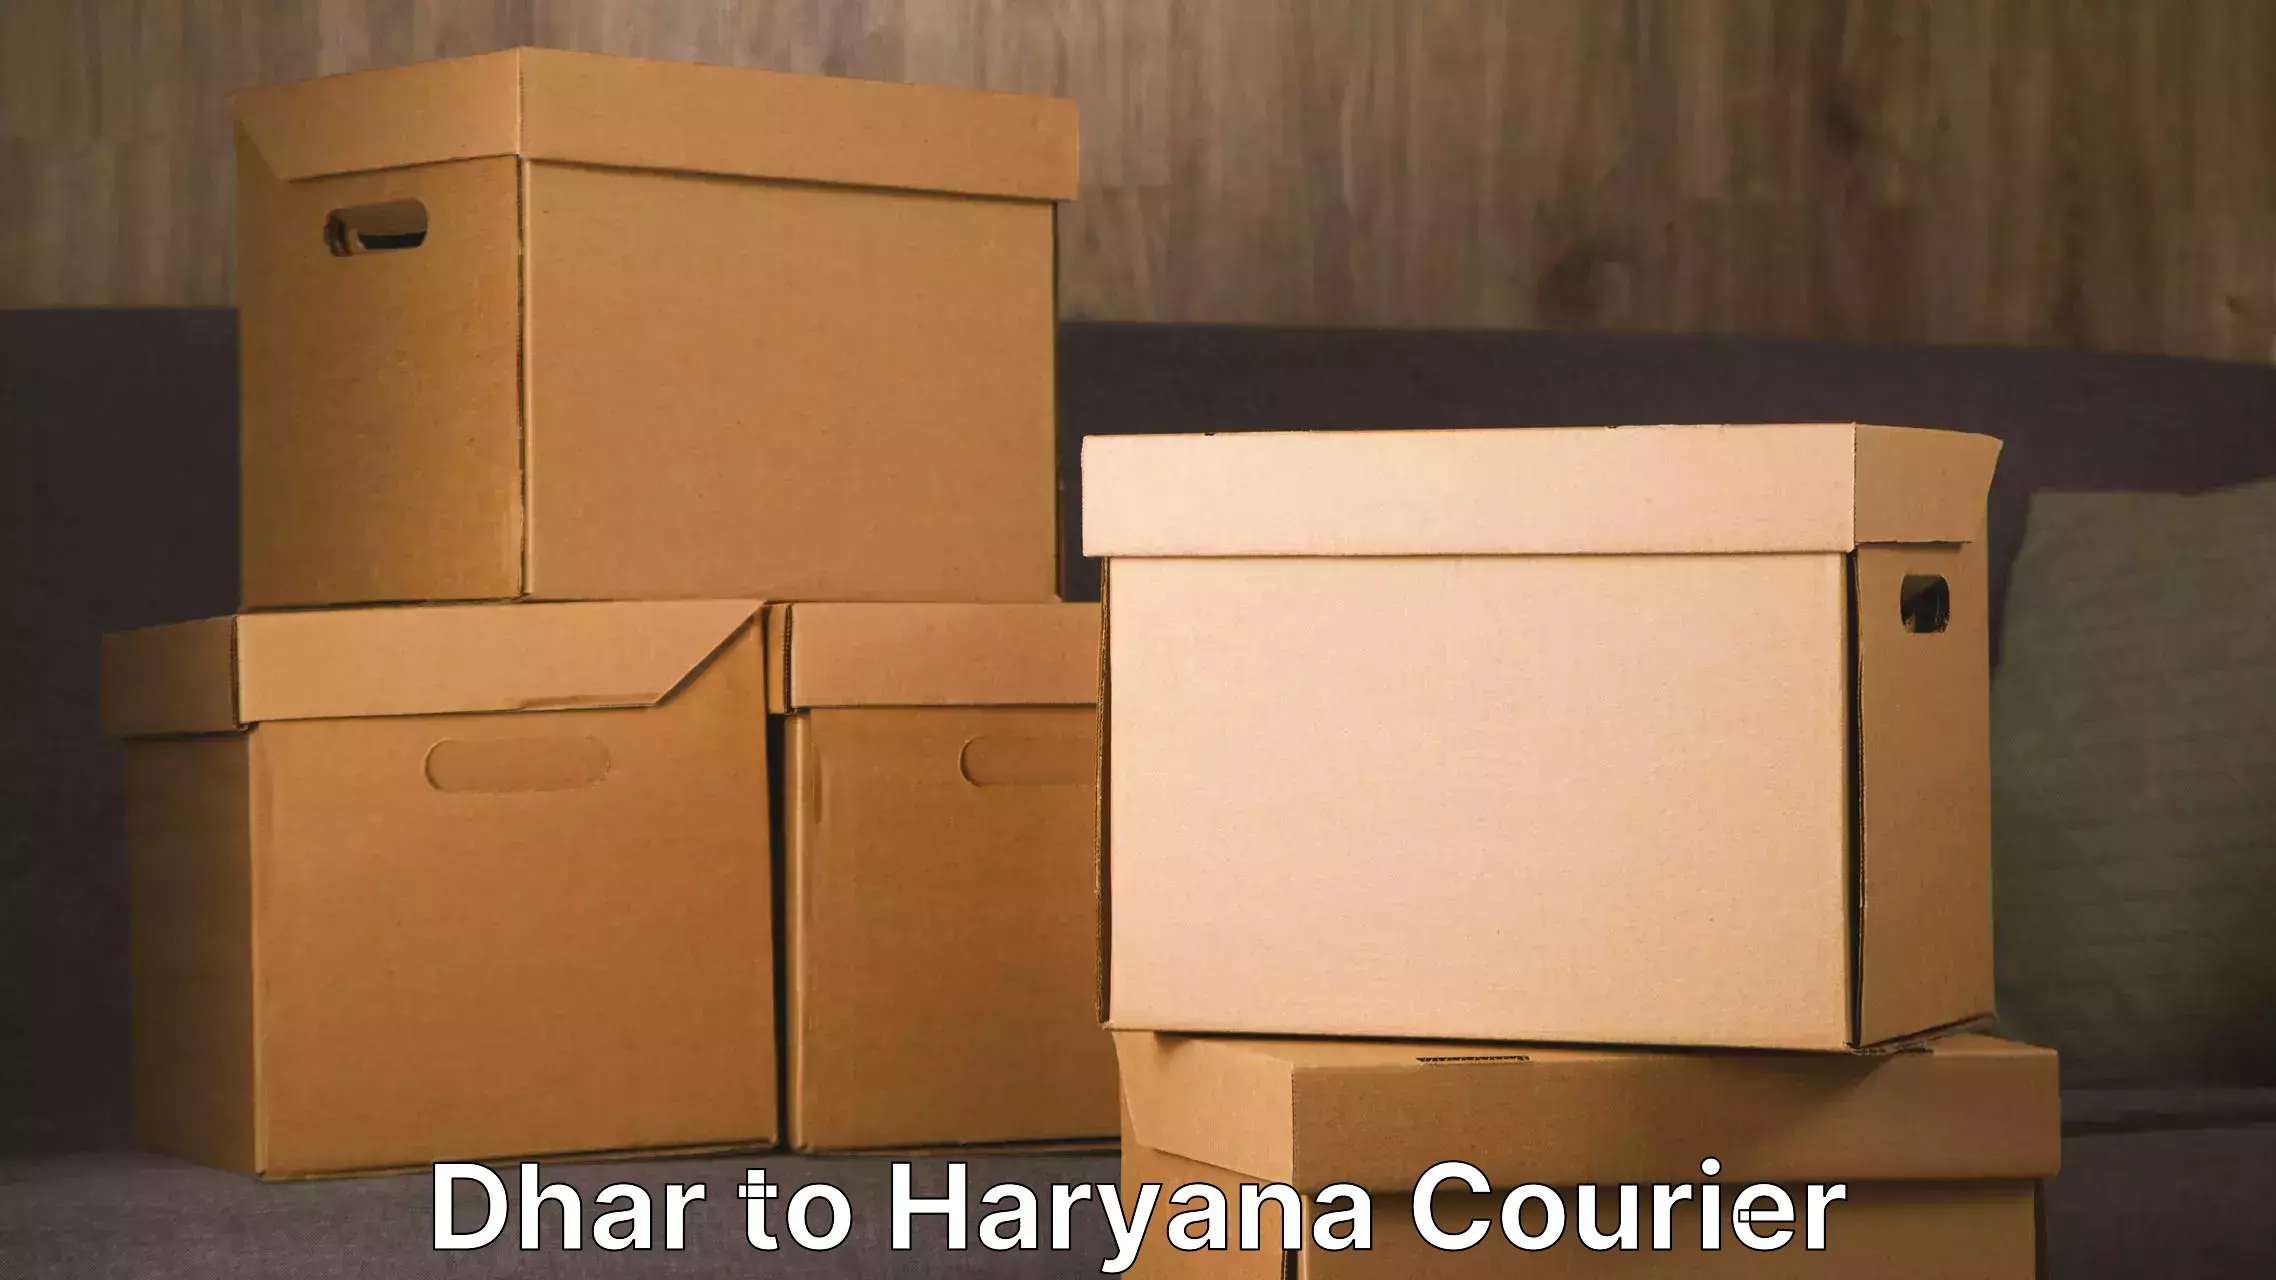 Professional moving company Dhar to Sirsa